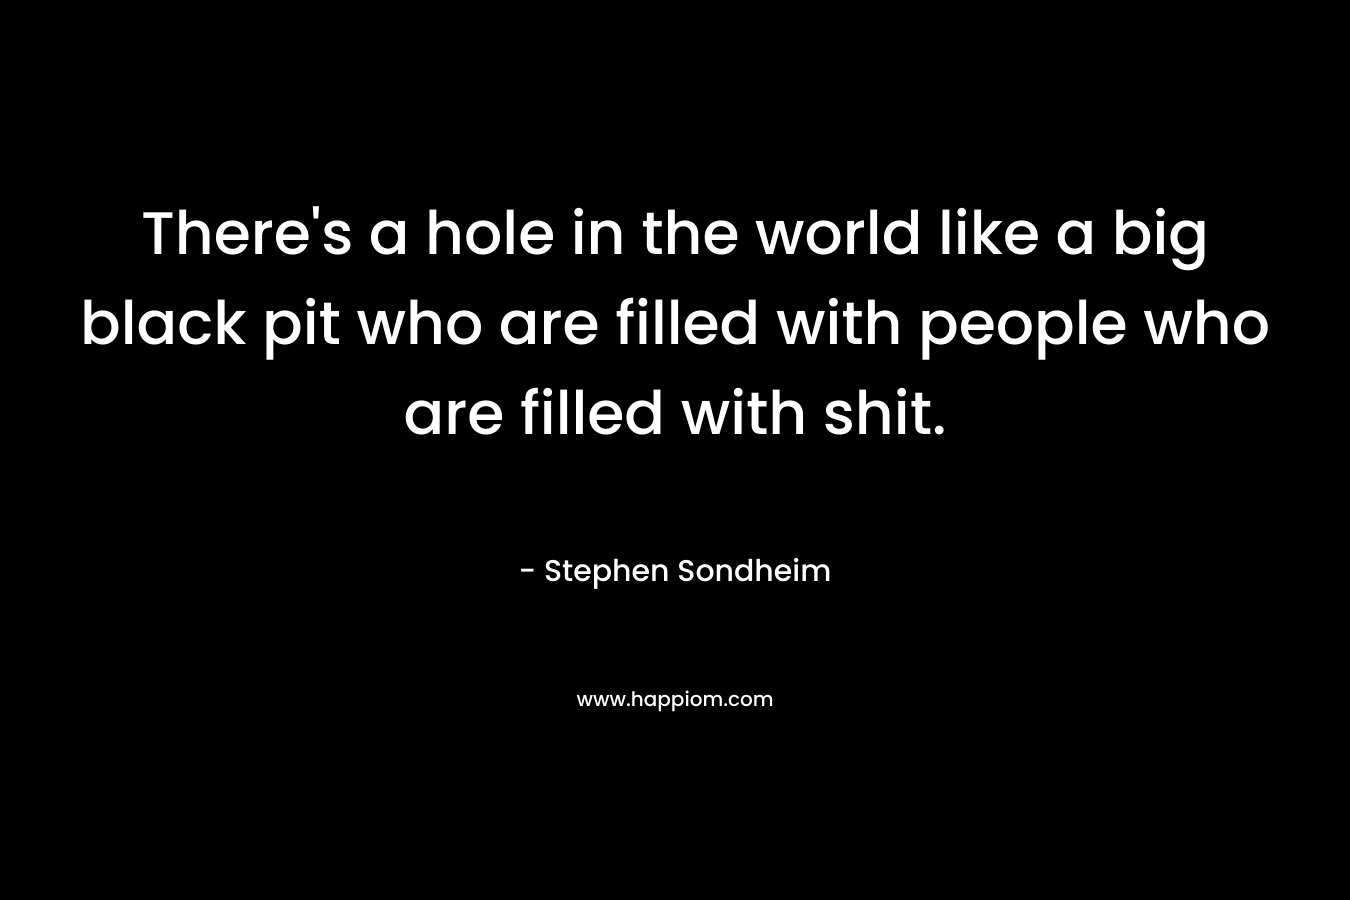 There's a hole in the world like a big black pit who are filled with people who are filled with shit.